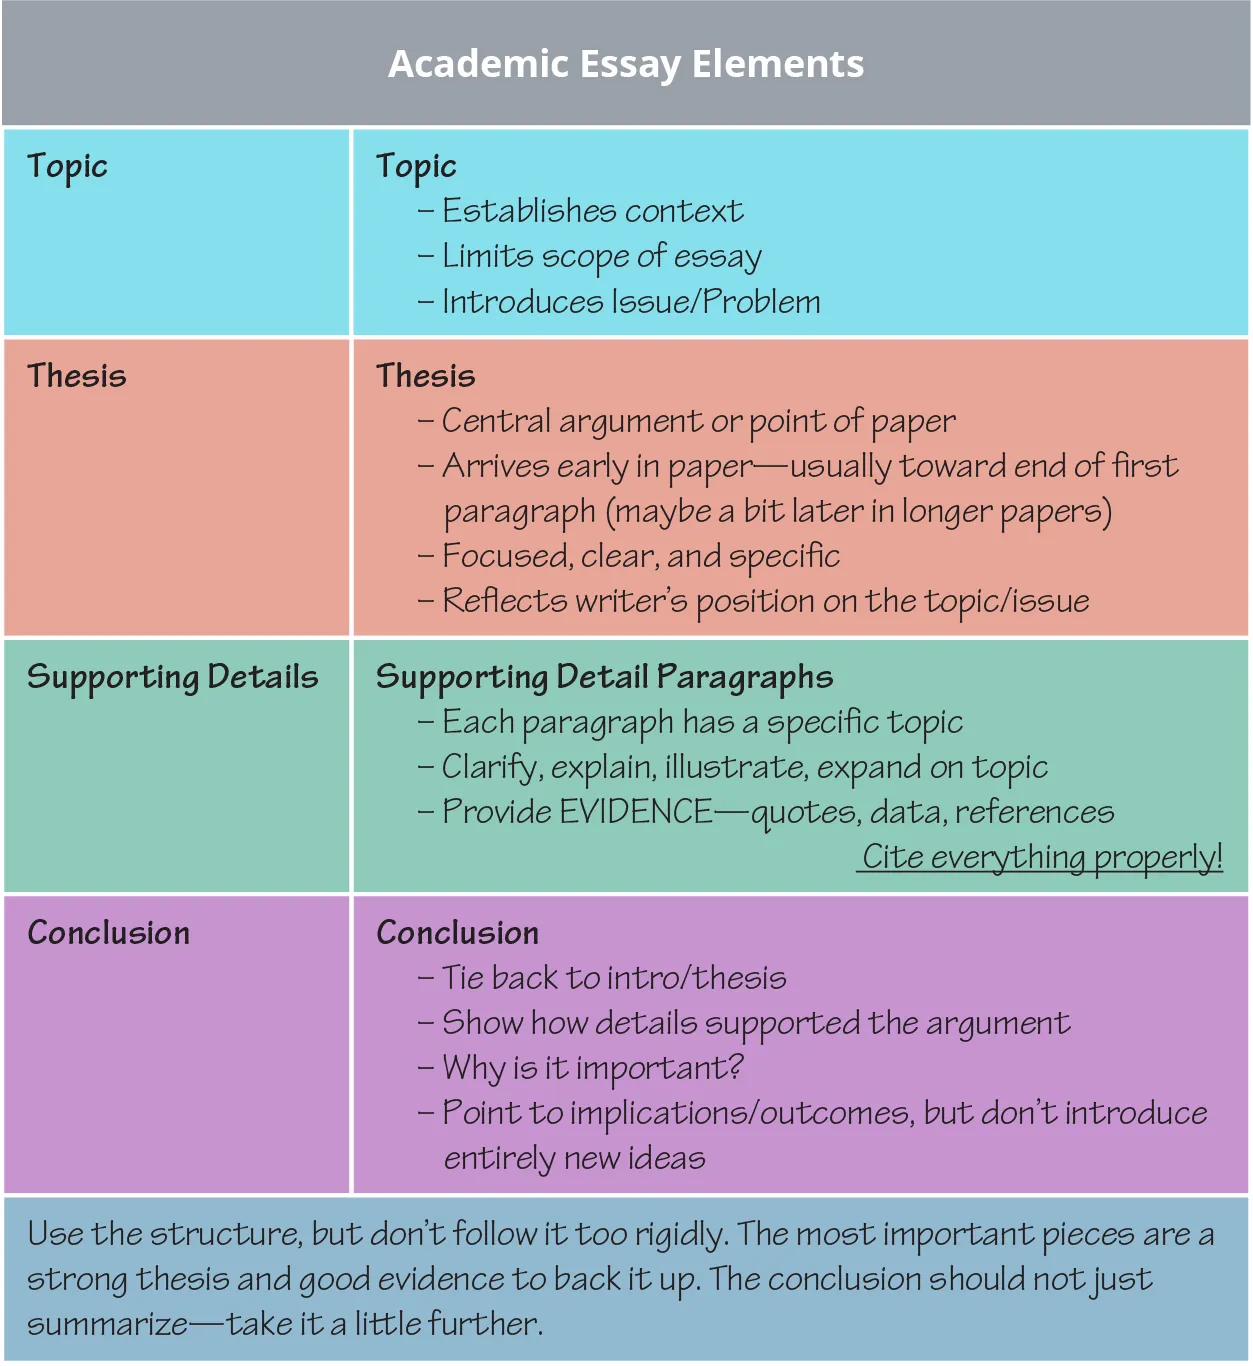 A chart shows “Topic,” “Thesis,” “Supporting Details,” and “Conclusion” as the four academic essay elements.